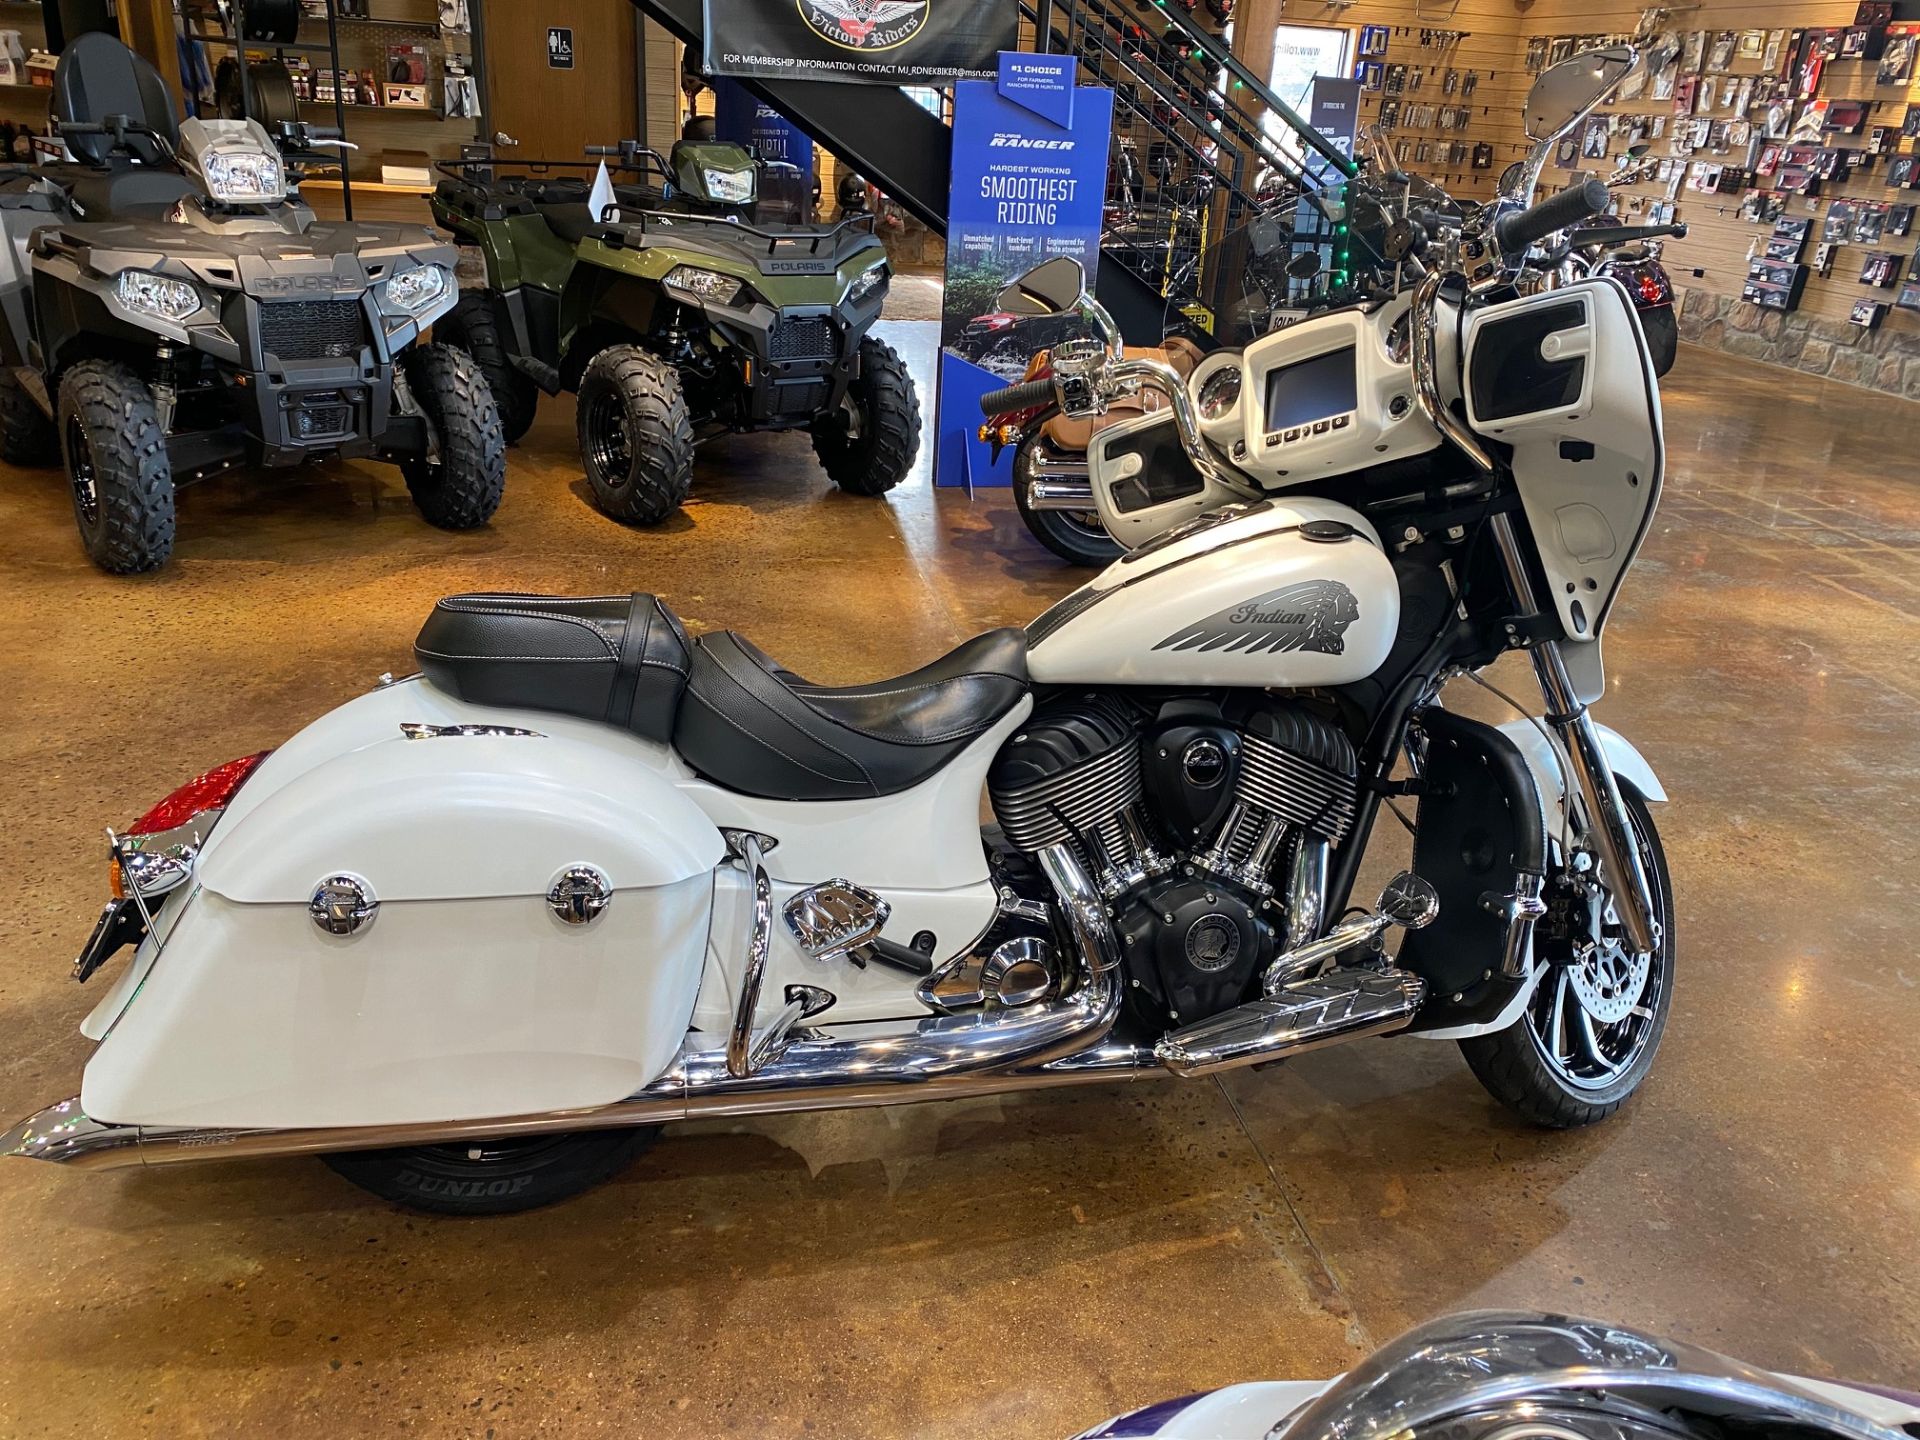 2018 Indian Chieftain in Lebanon, New Jersey - Photo 1